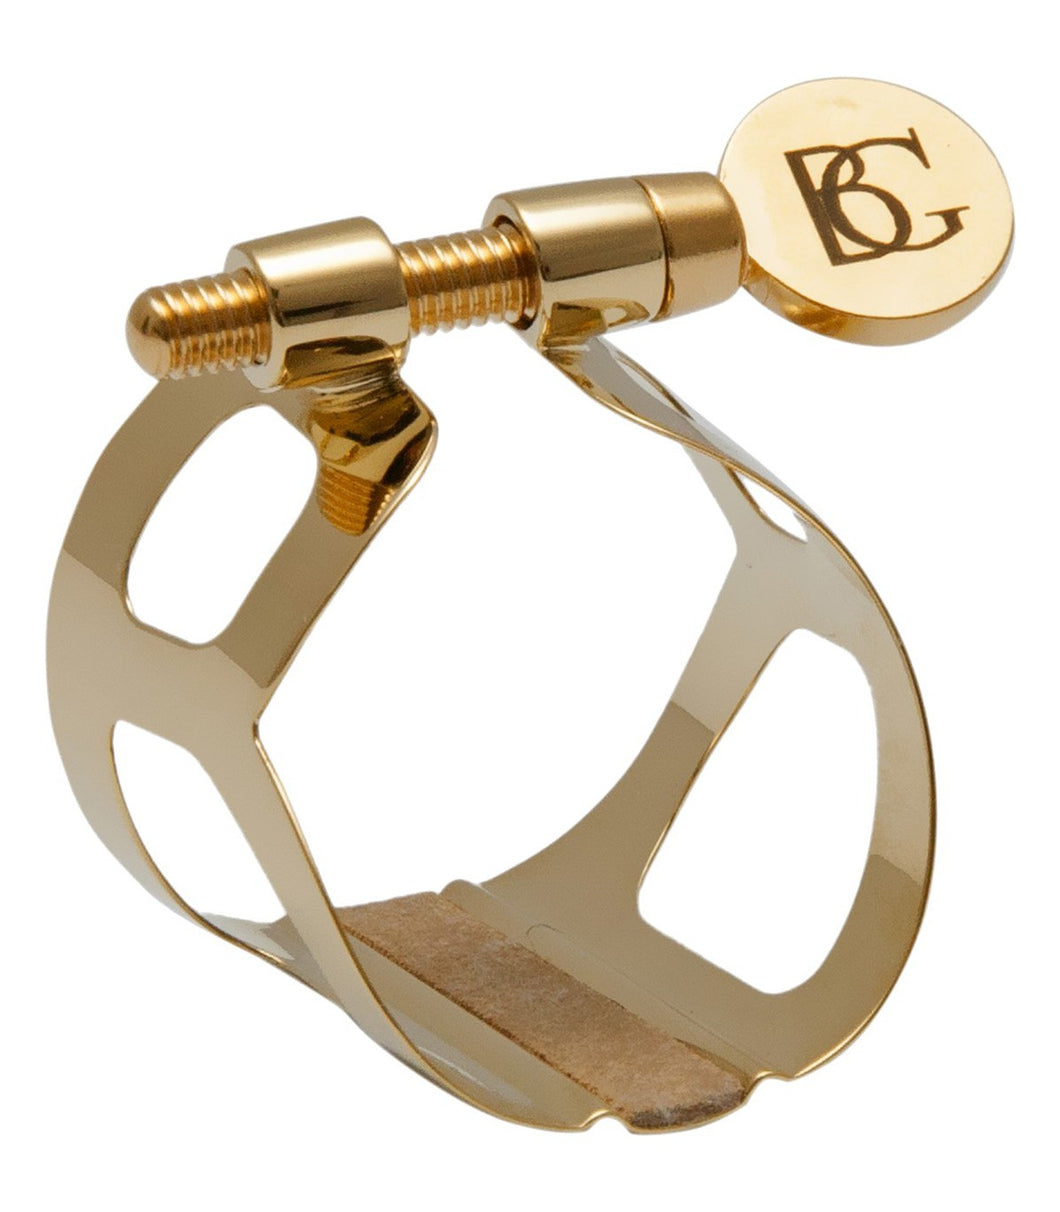 BG Tradition Ligature for Clarinets, 24k Gold Plated